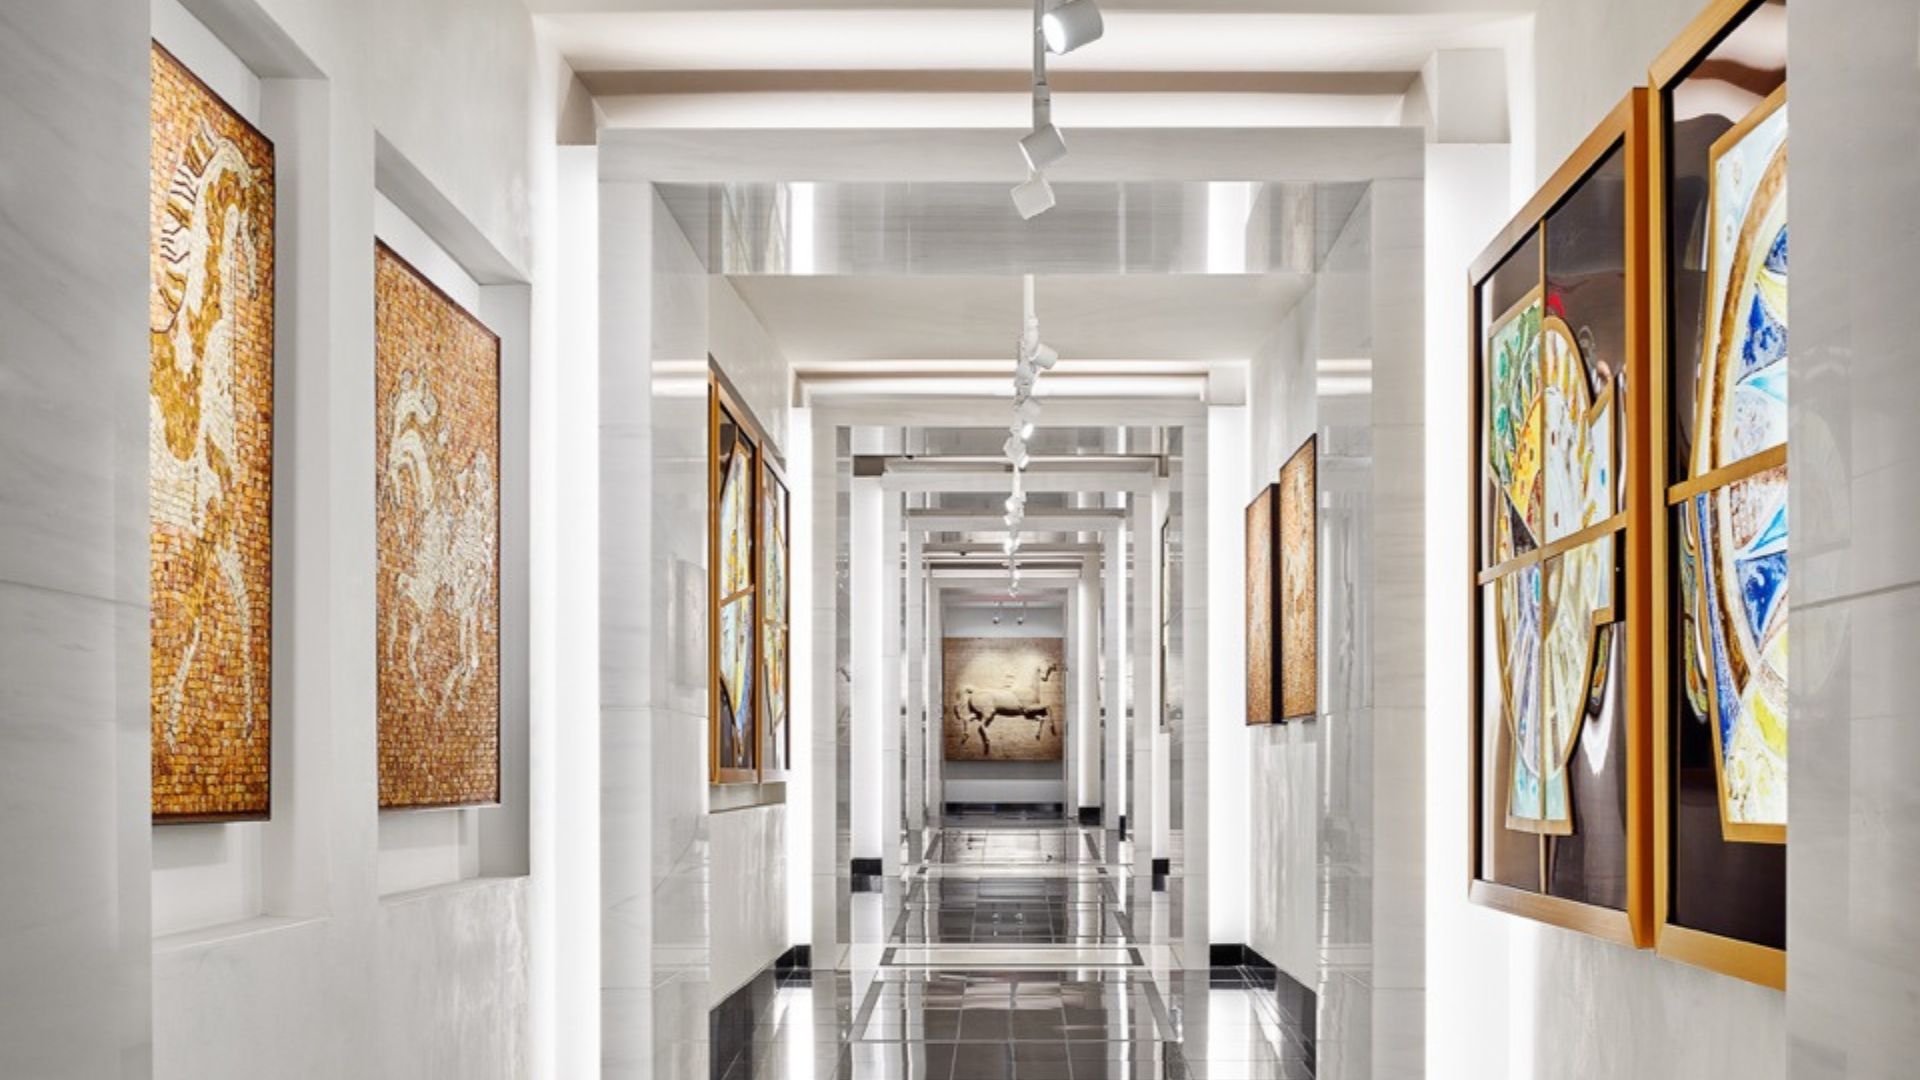 A Hallway With Art On The Walls